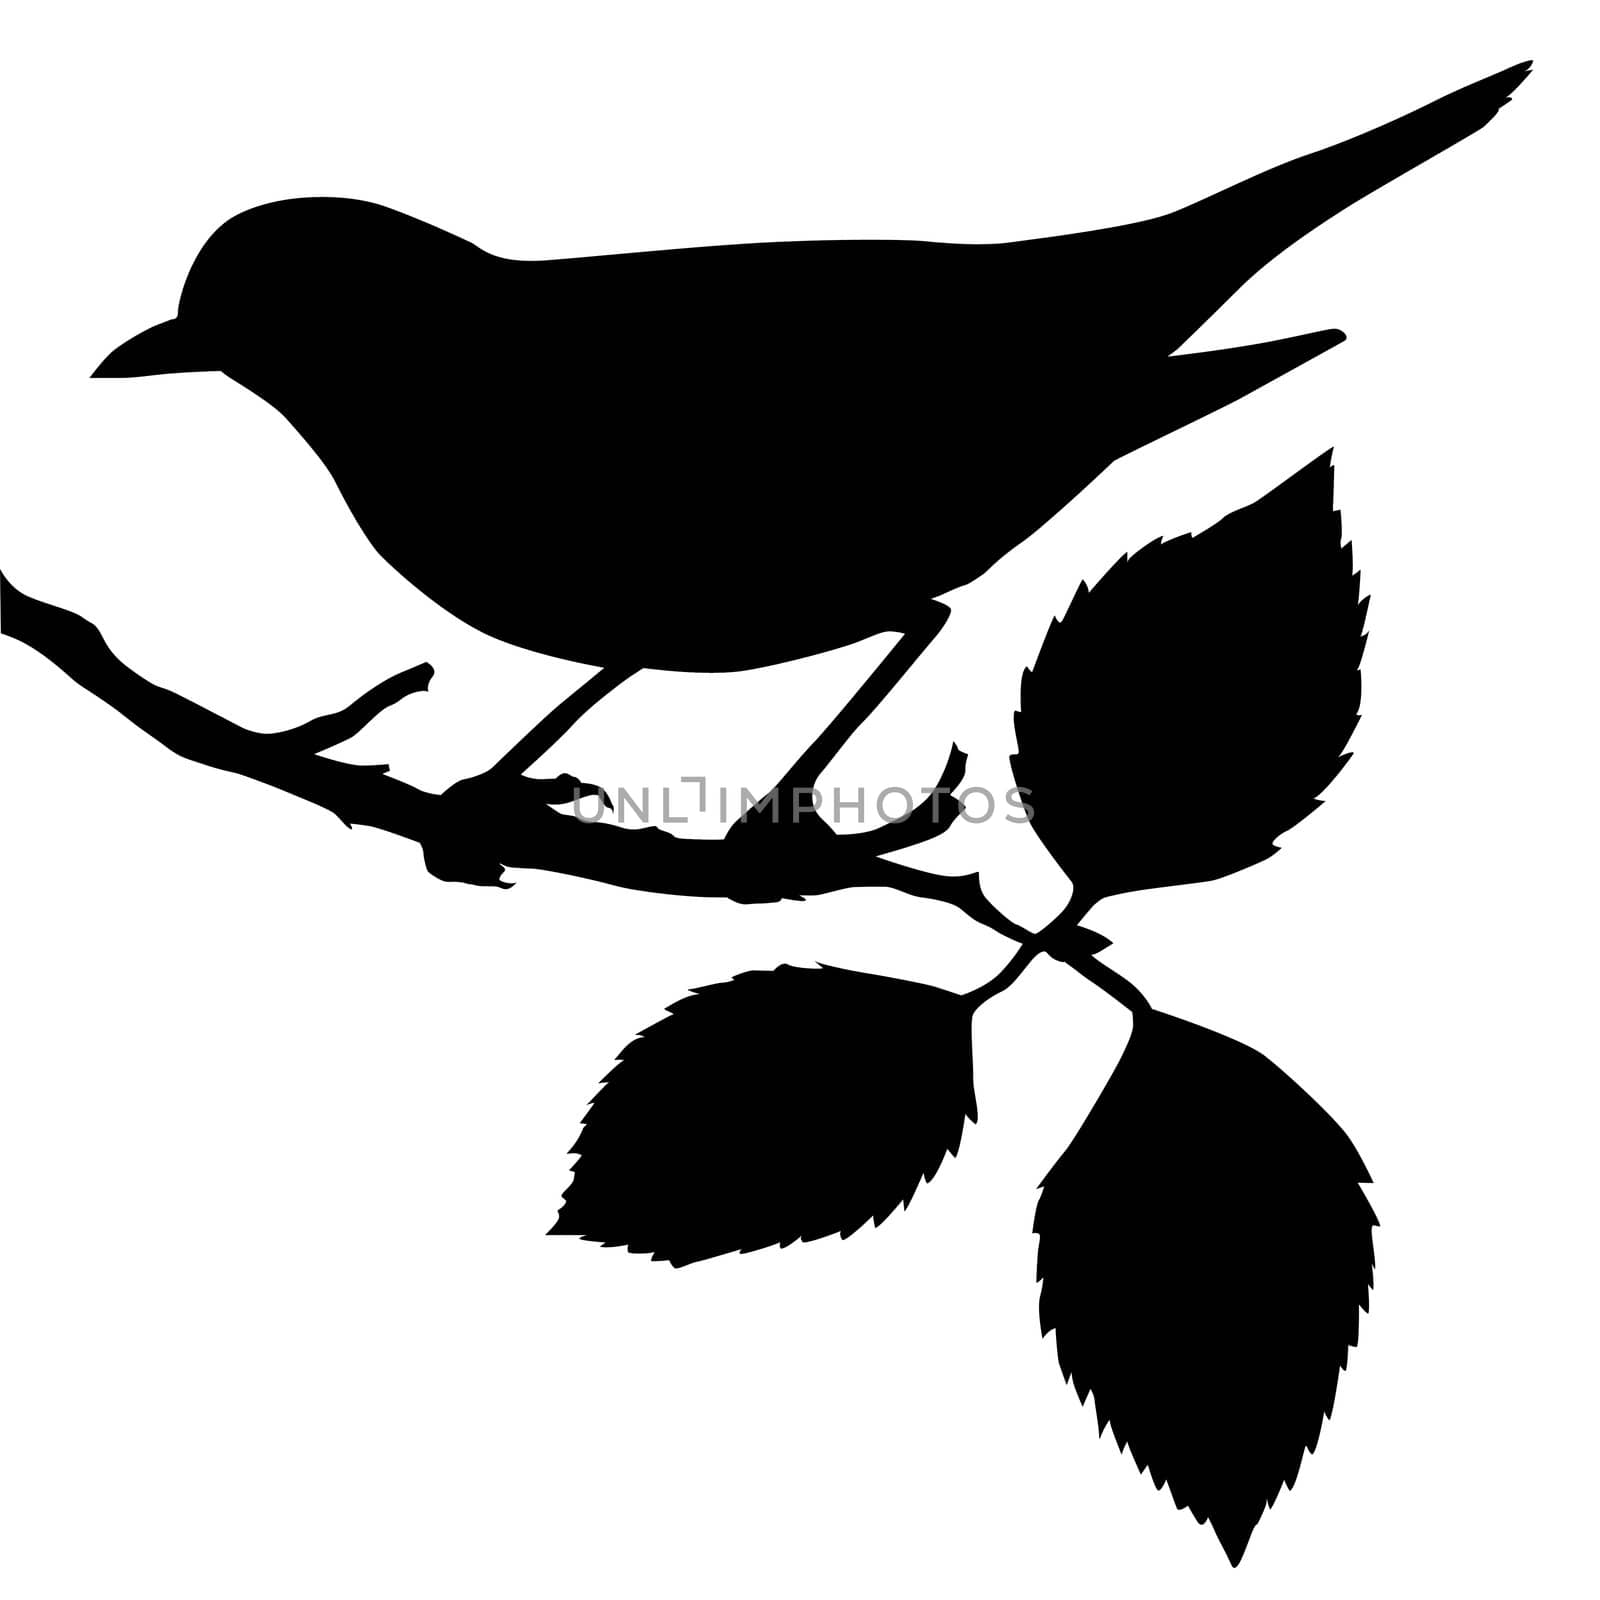 silhouette of the bird on branch by basel101658